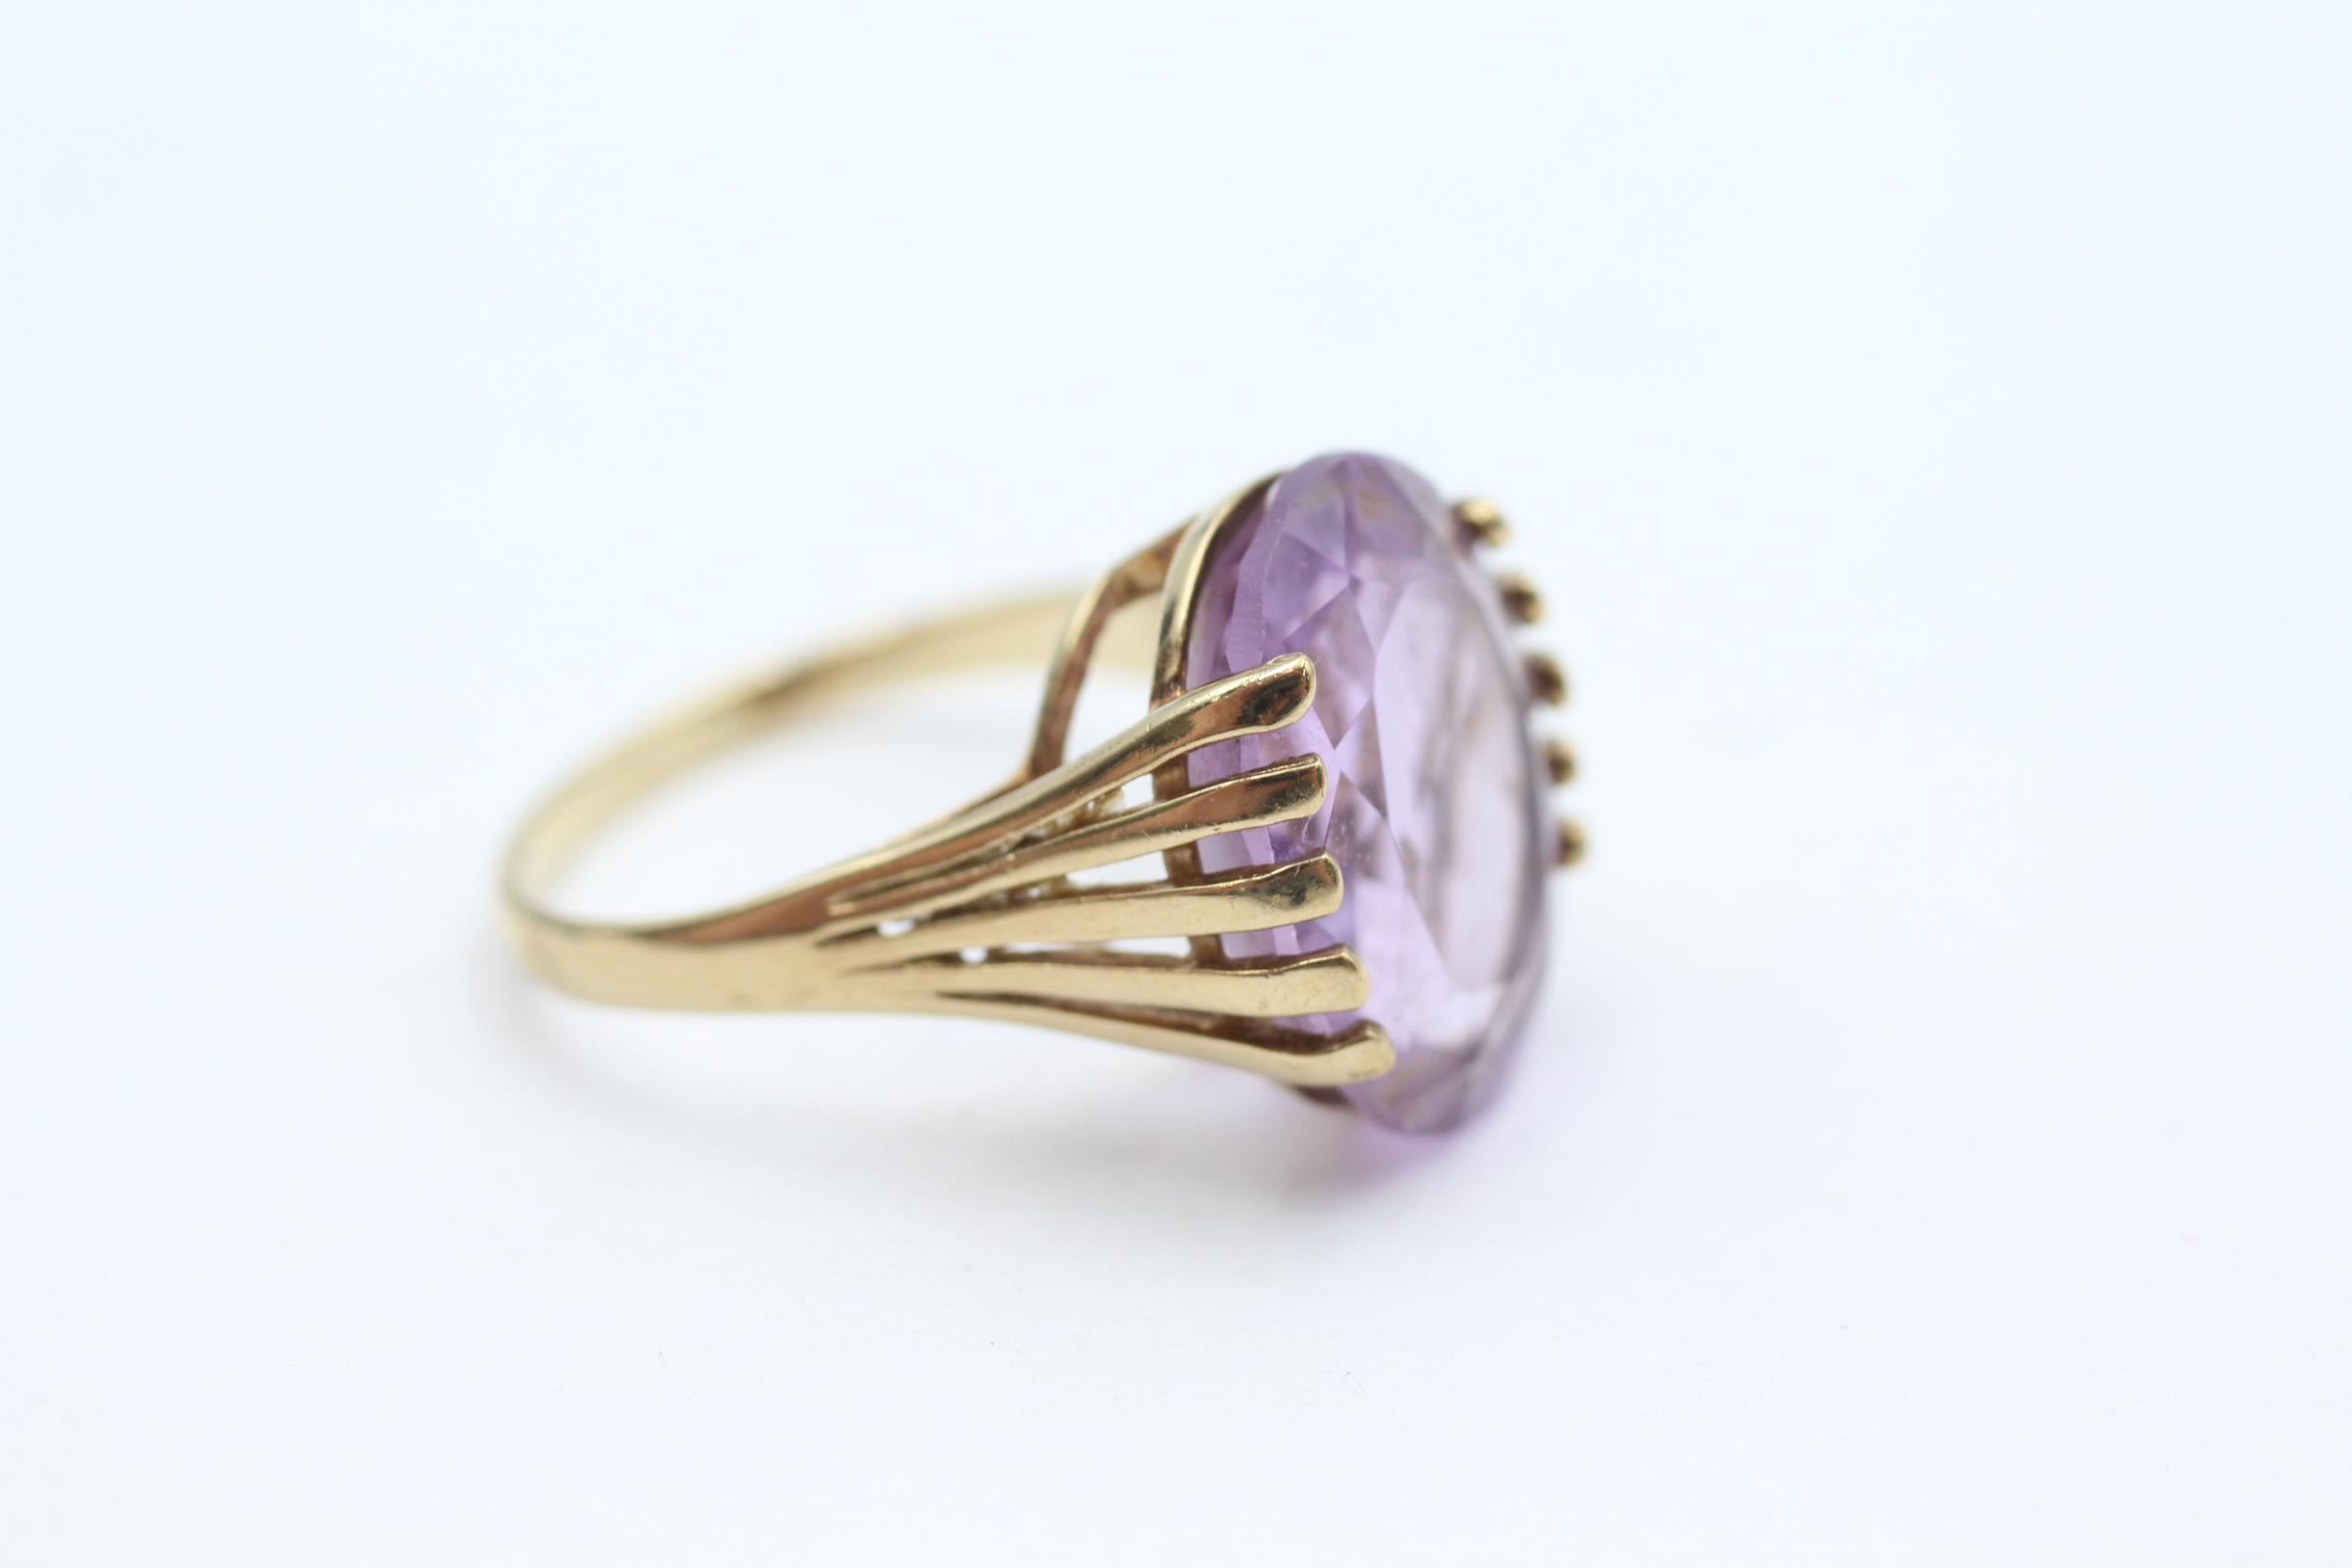 9ct gold oval amethyst single stone cocktail ring - MISHAPEN - AS SEEN Size L 1/2 - 4 g - Image 2 of 4